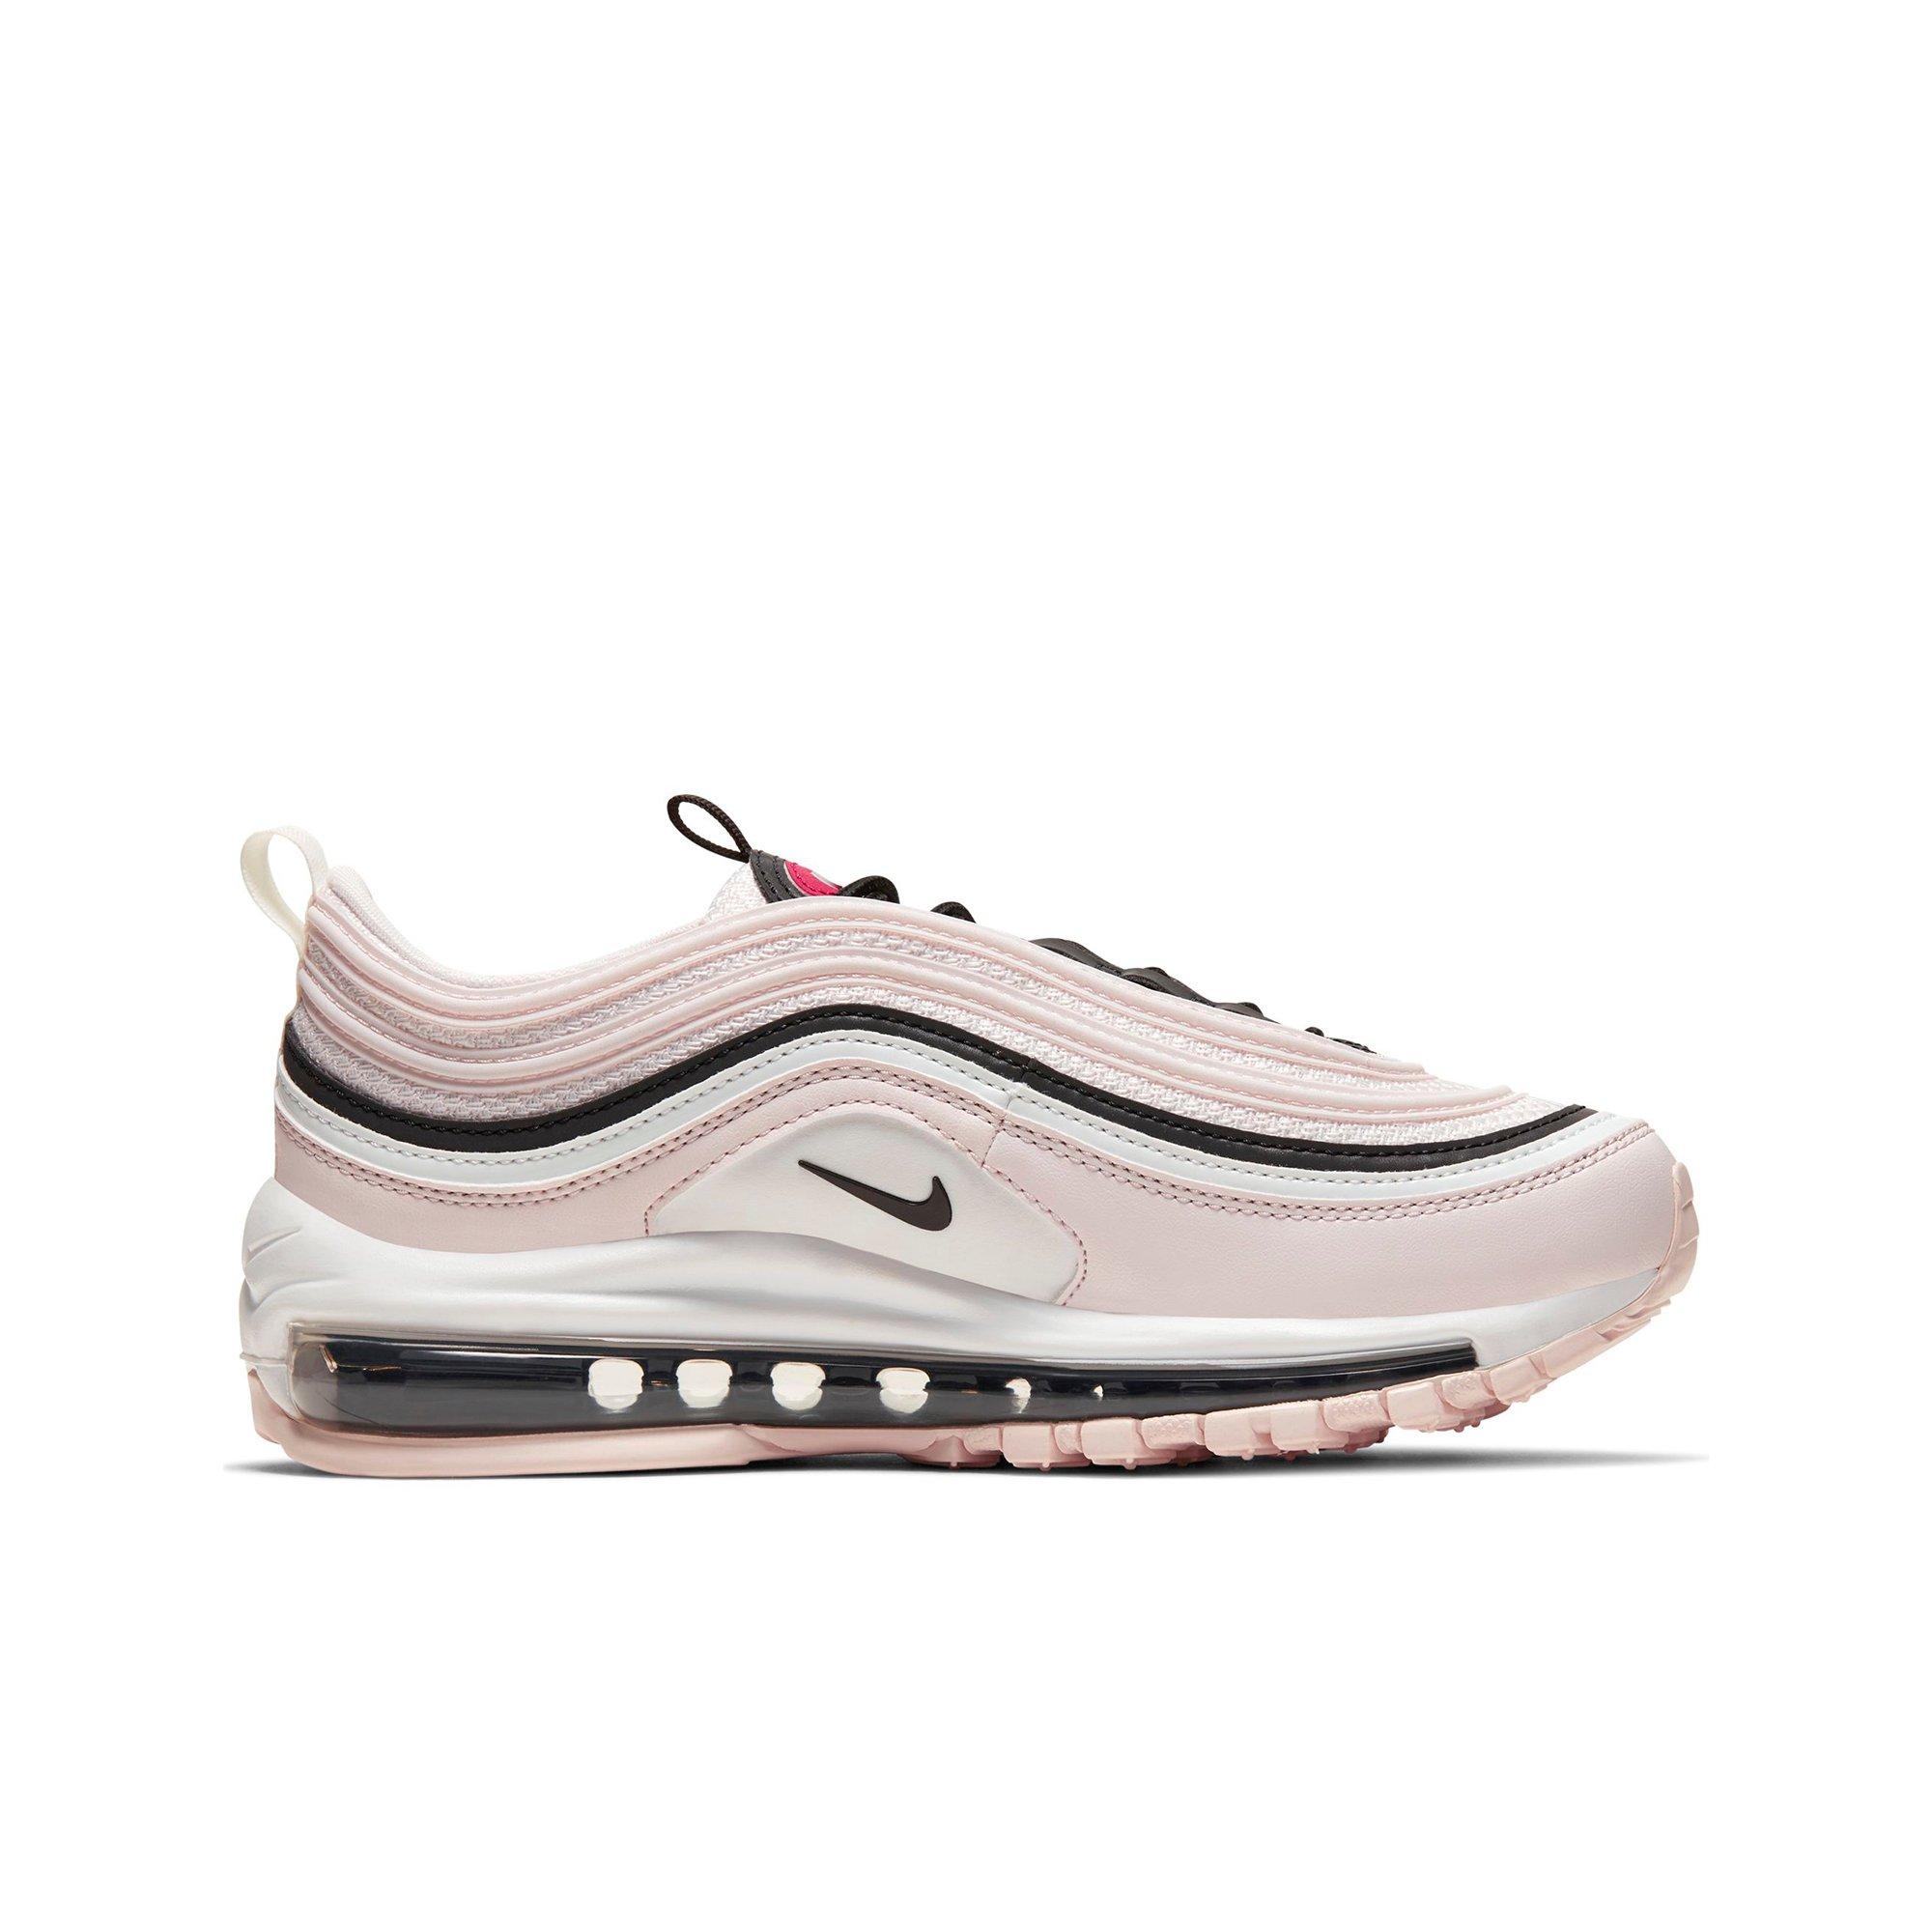 nike 97 pink and black